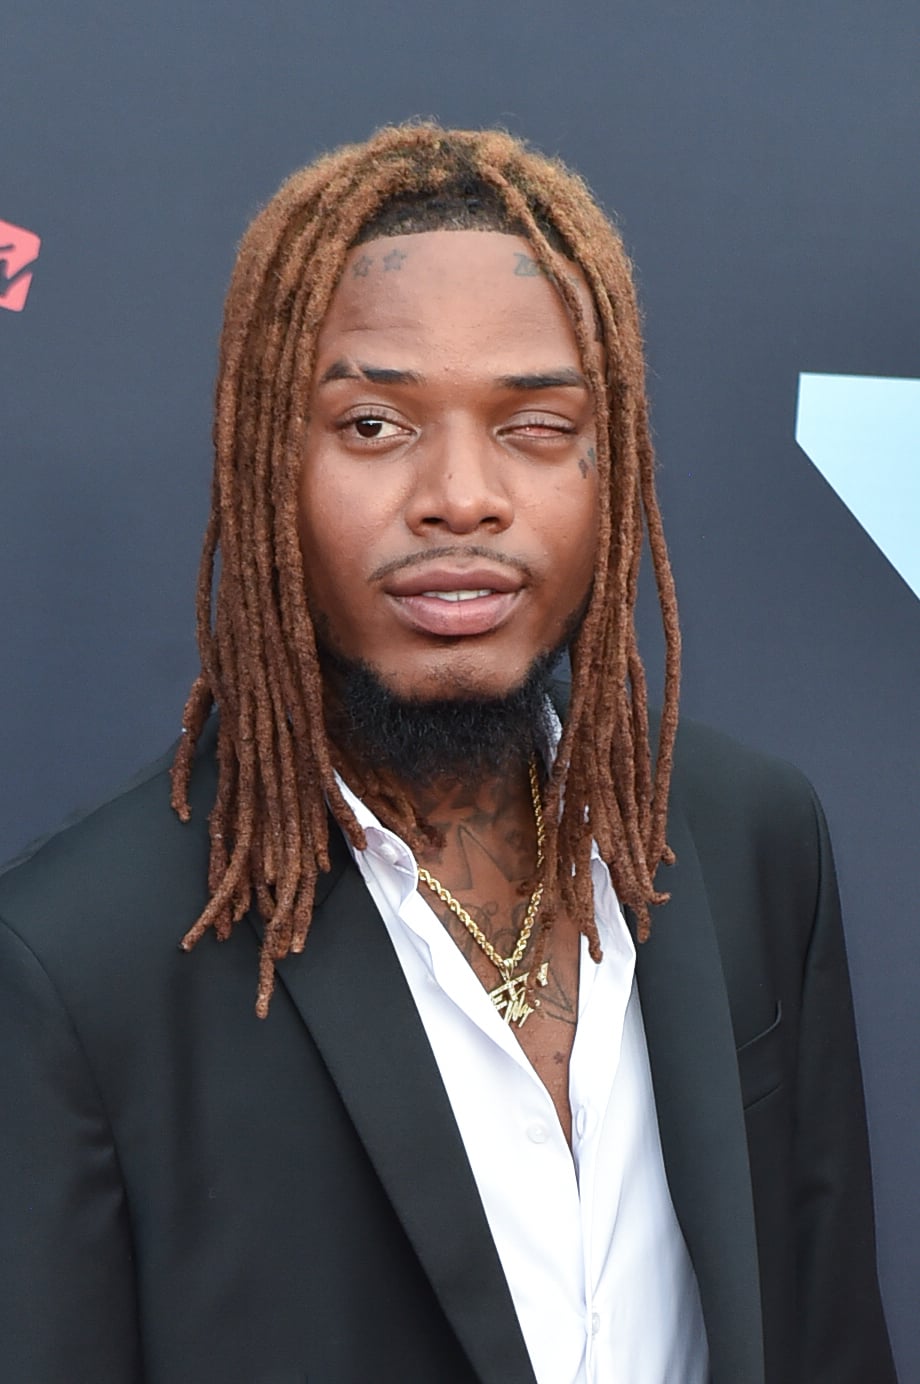 NEWARK, NEW JERSEY - AUGUST 26: Rapper Fetty Wap attends the 2019 MTV Video Music Awards red carpet at Prudential Centre on August 26, 2019 in Newark, New Jersey. (Photo by Aaron J. Thornton/Getty Images)